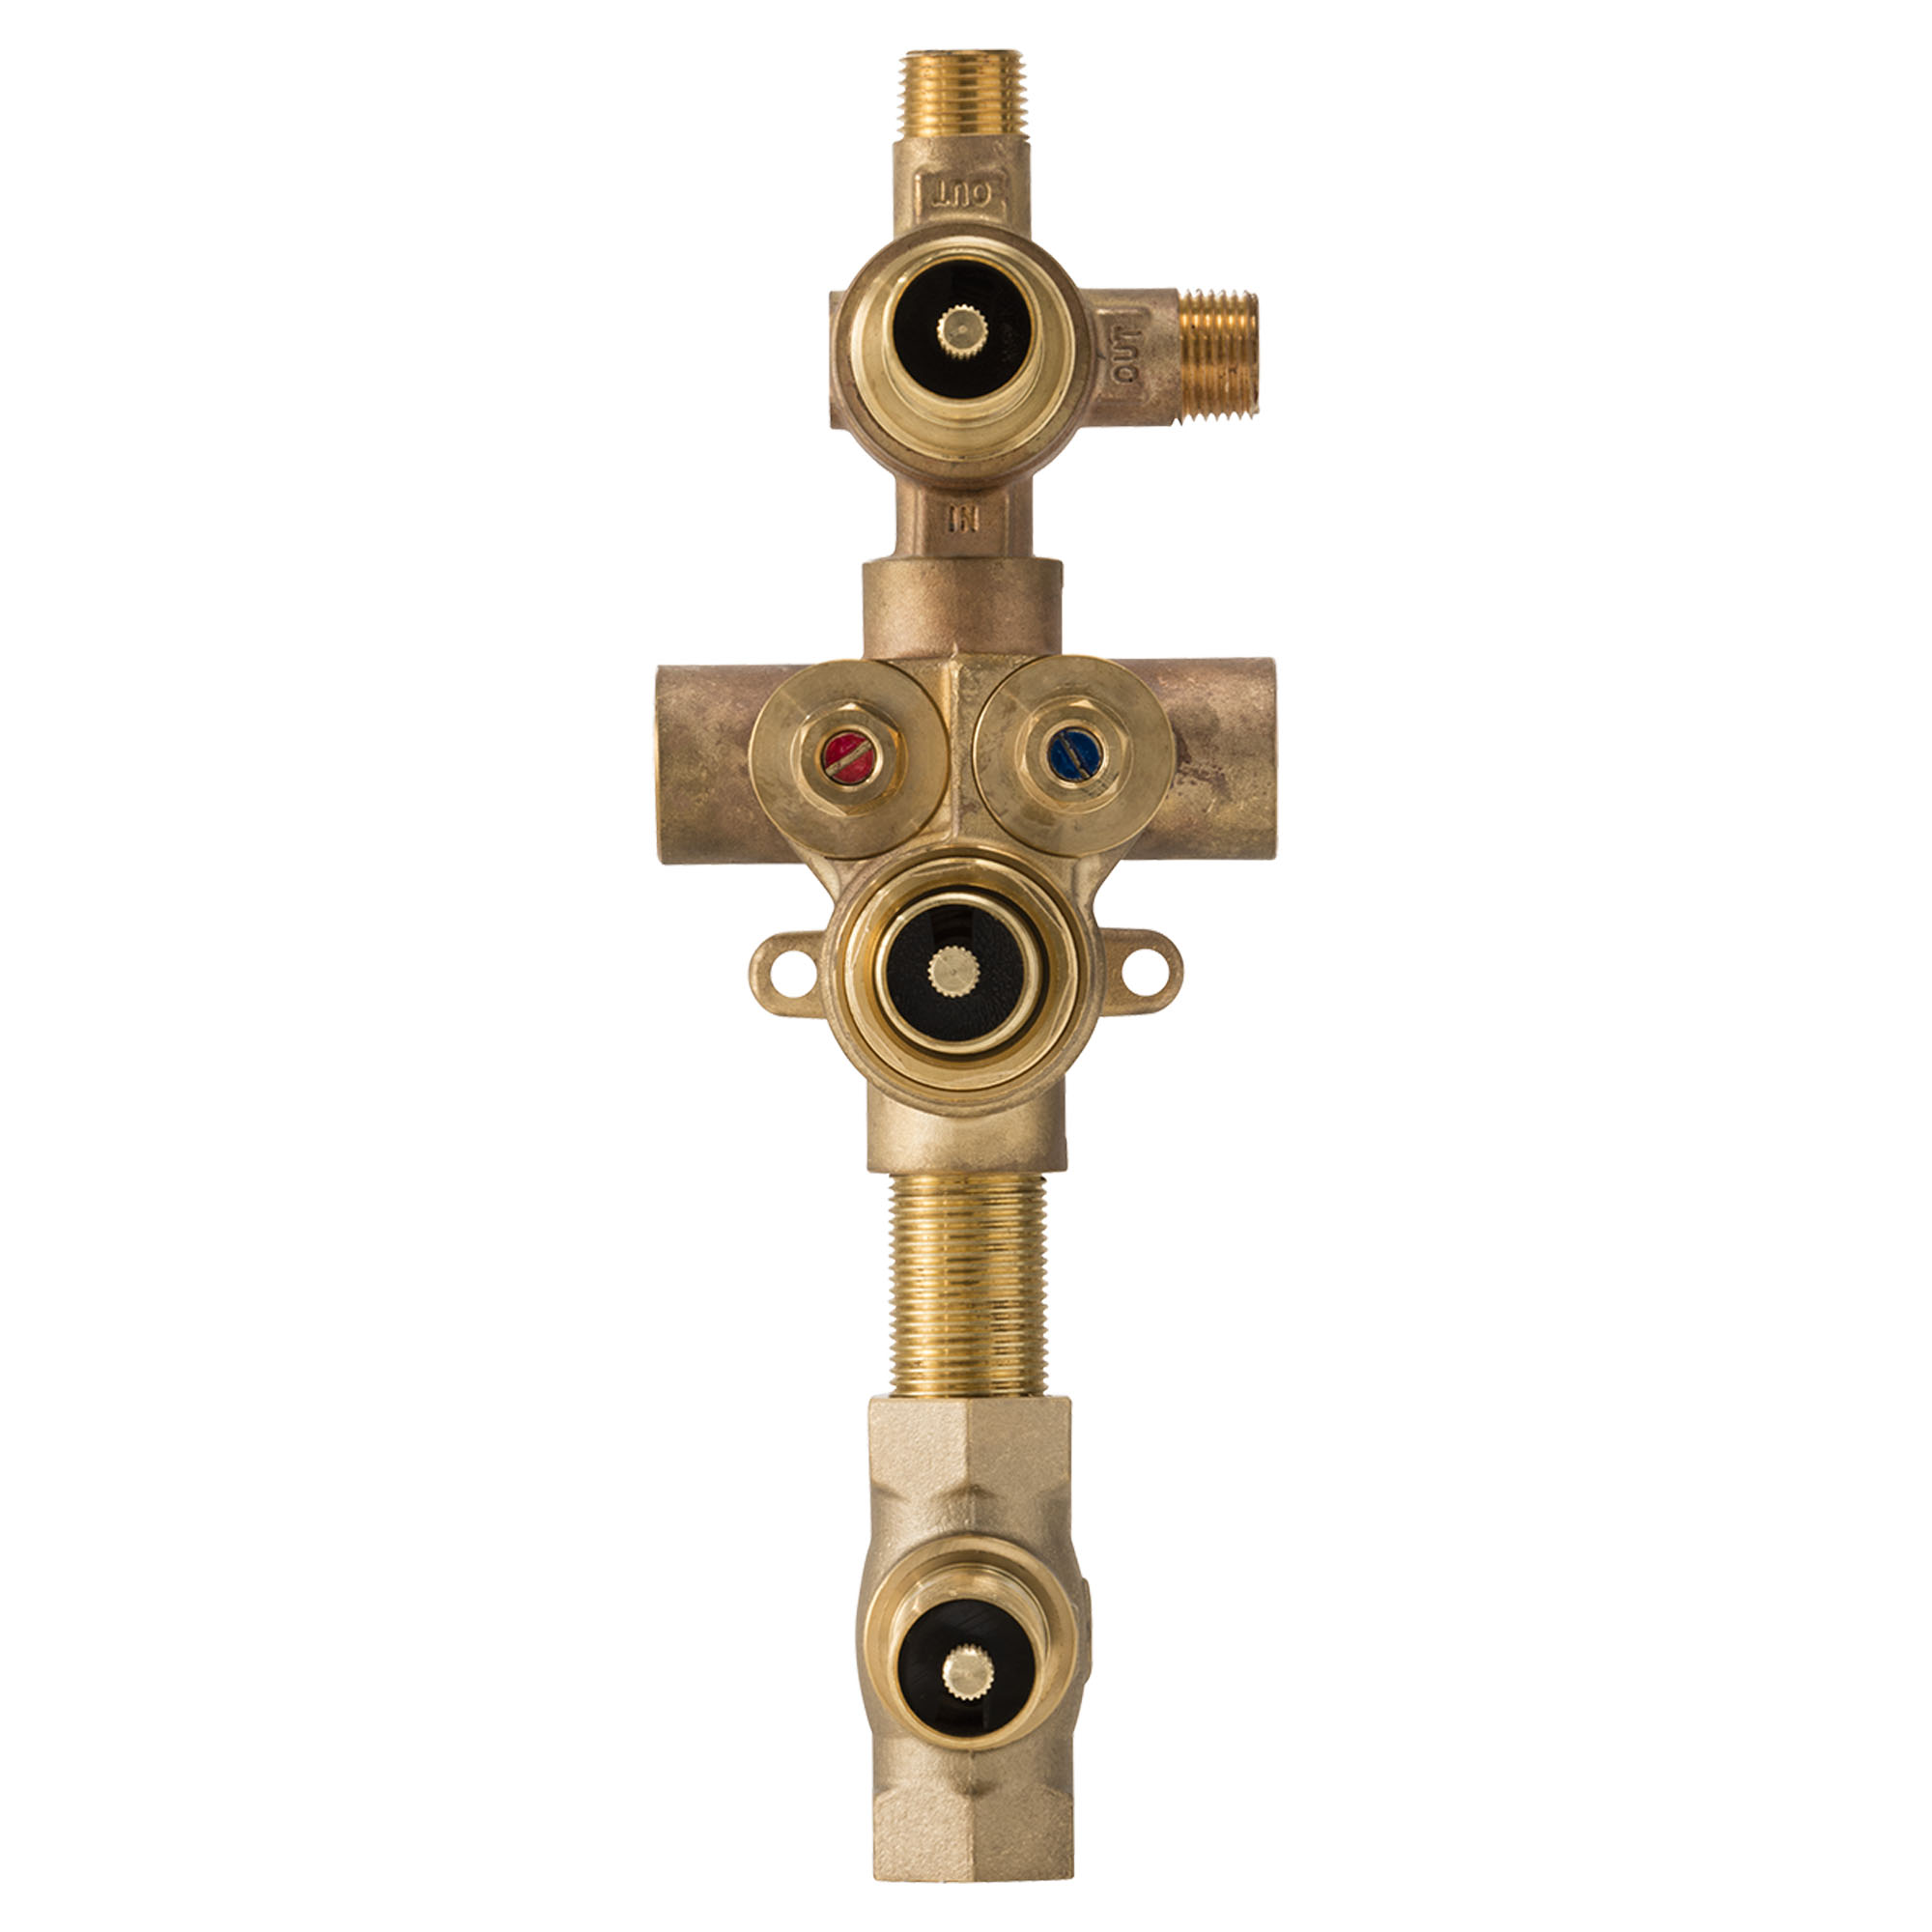 3-Handle Thermostatic Rough Valve with 2-Way Diverter Shared Functions